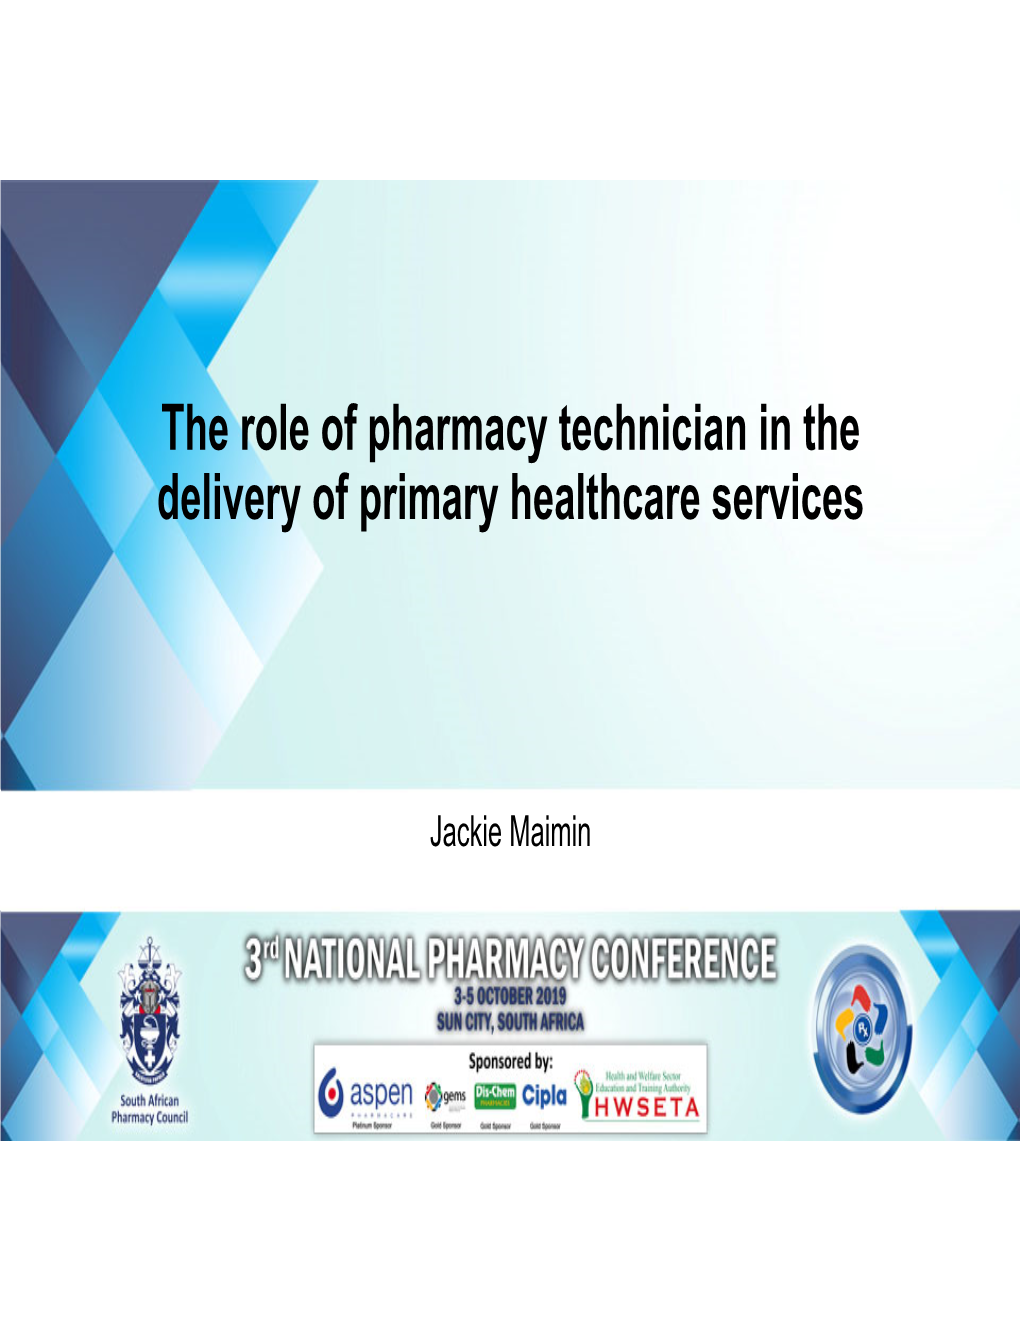 The Role of Pharmacy Technician in the Delivery of Primary Healthcare Services